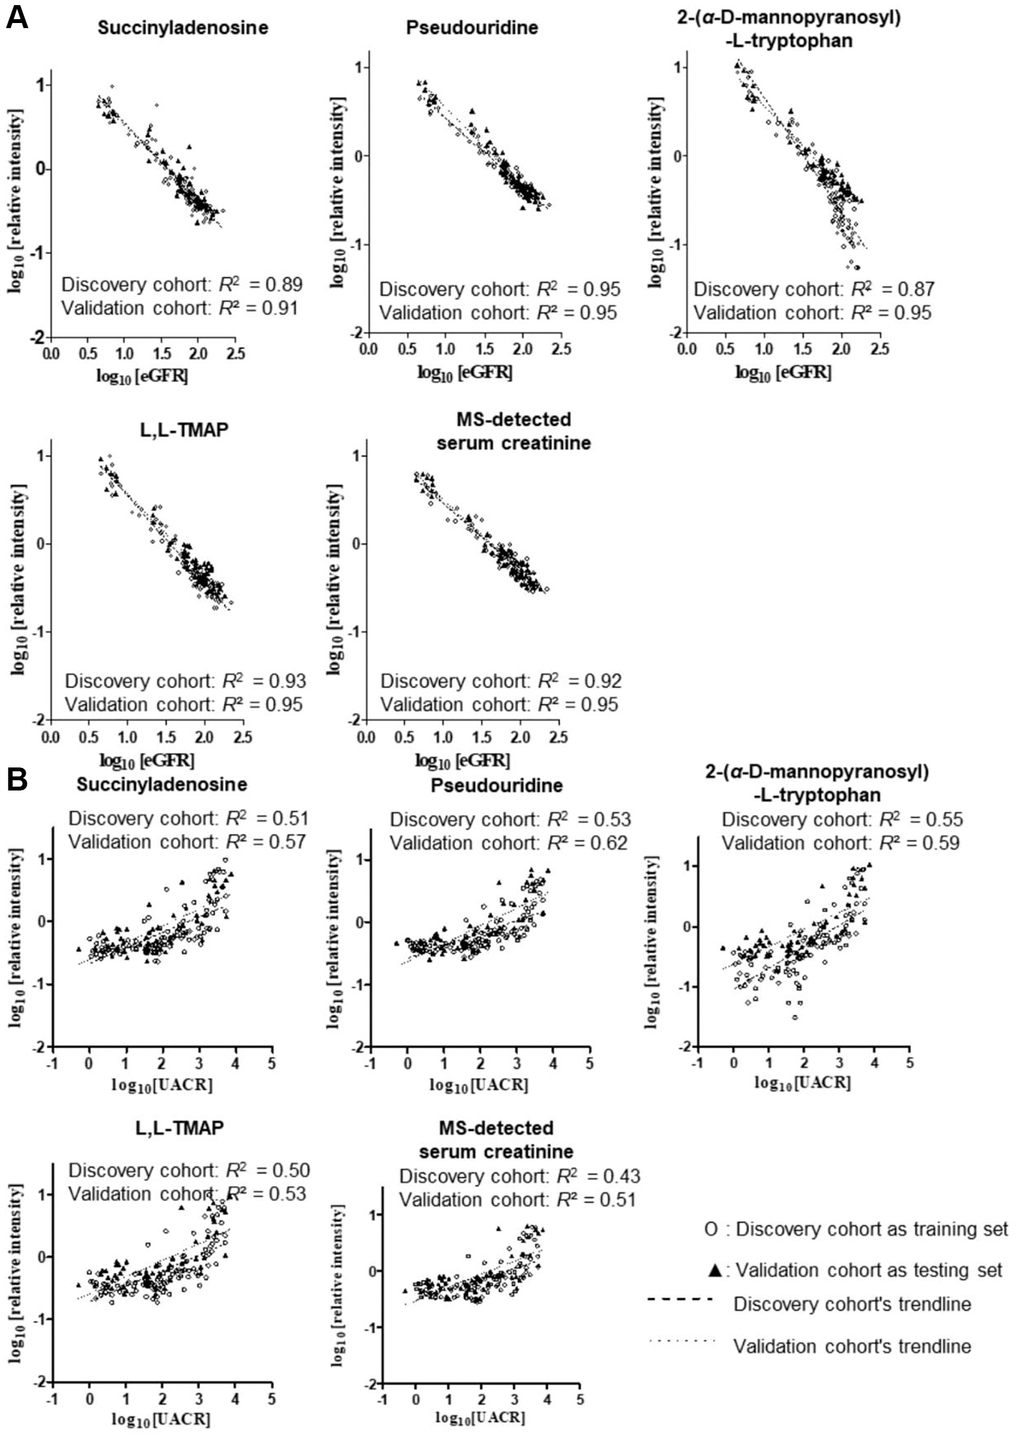 Linear regression analysis among CDBs, sCr, eGFR (A) and UACR (B) in all stages and T2D patients after log10 transformation, respectively. Four metabolites showed similar strong predictive power with MS-detected sCr as their R2 of the equations were all above 0.85. R2 of UACR prediction model were close to 0.5.